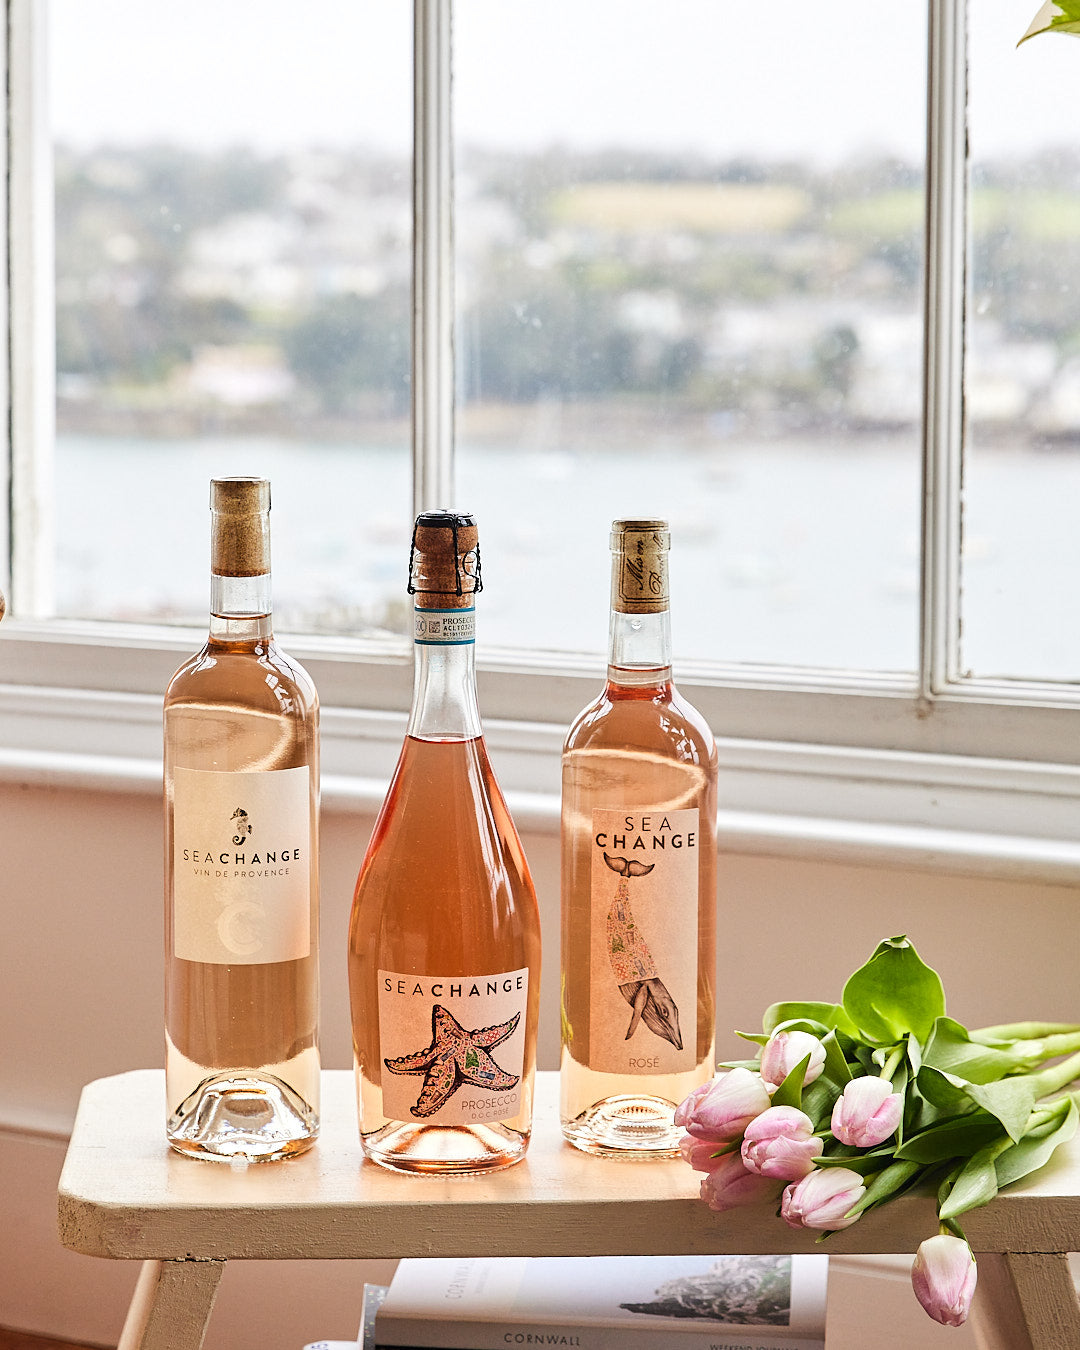 MAKE IT A SUSTAINABLE VALENTINE’S DAY WITH SEA CHANGE WINE